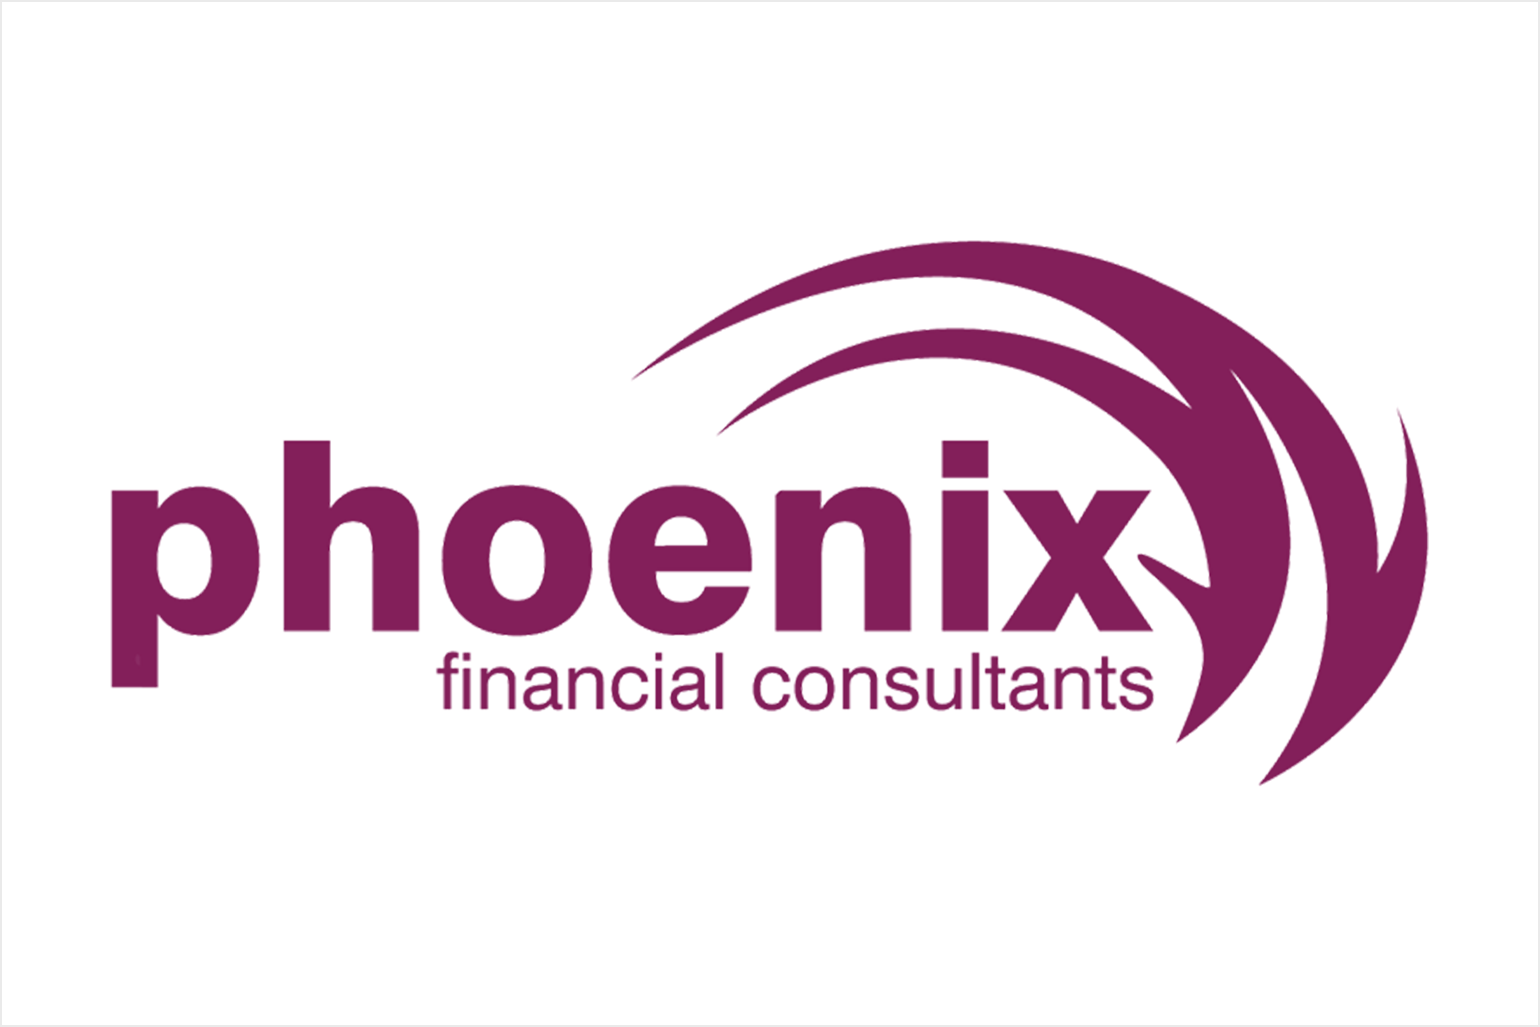 phoenix financial services phone number